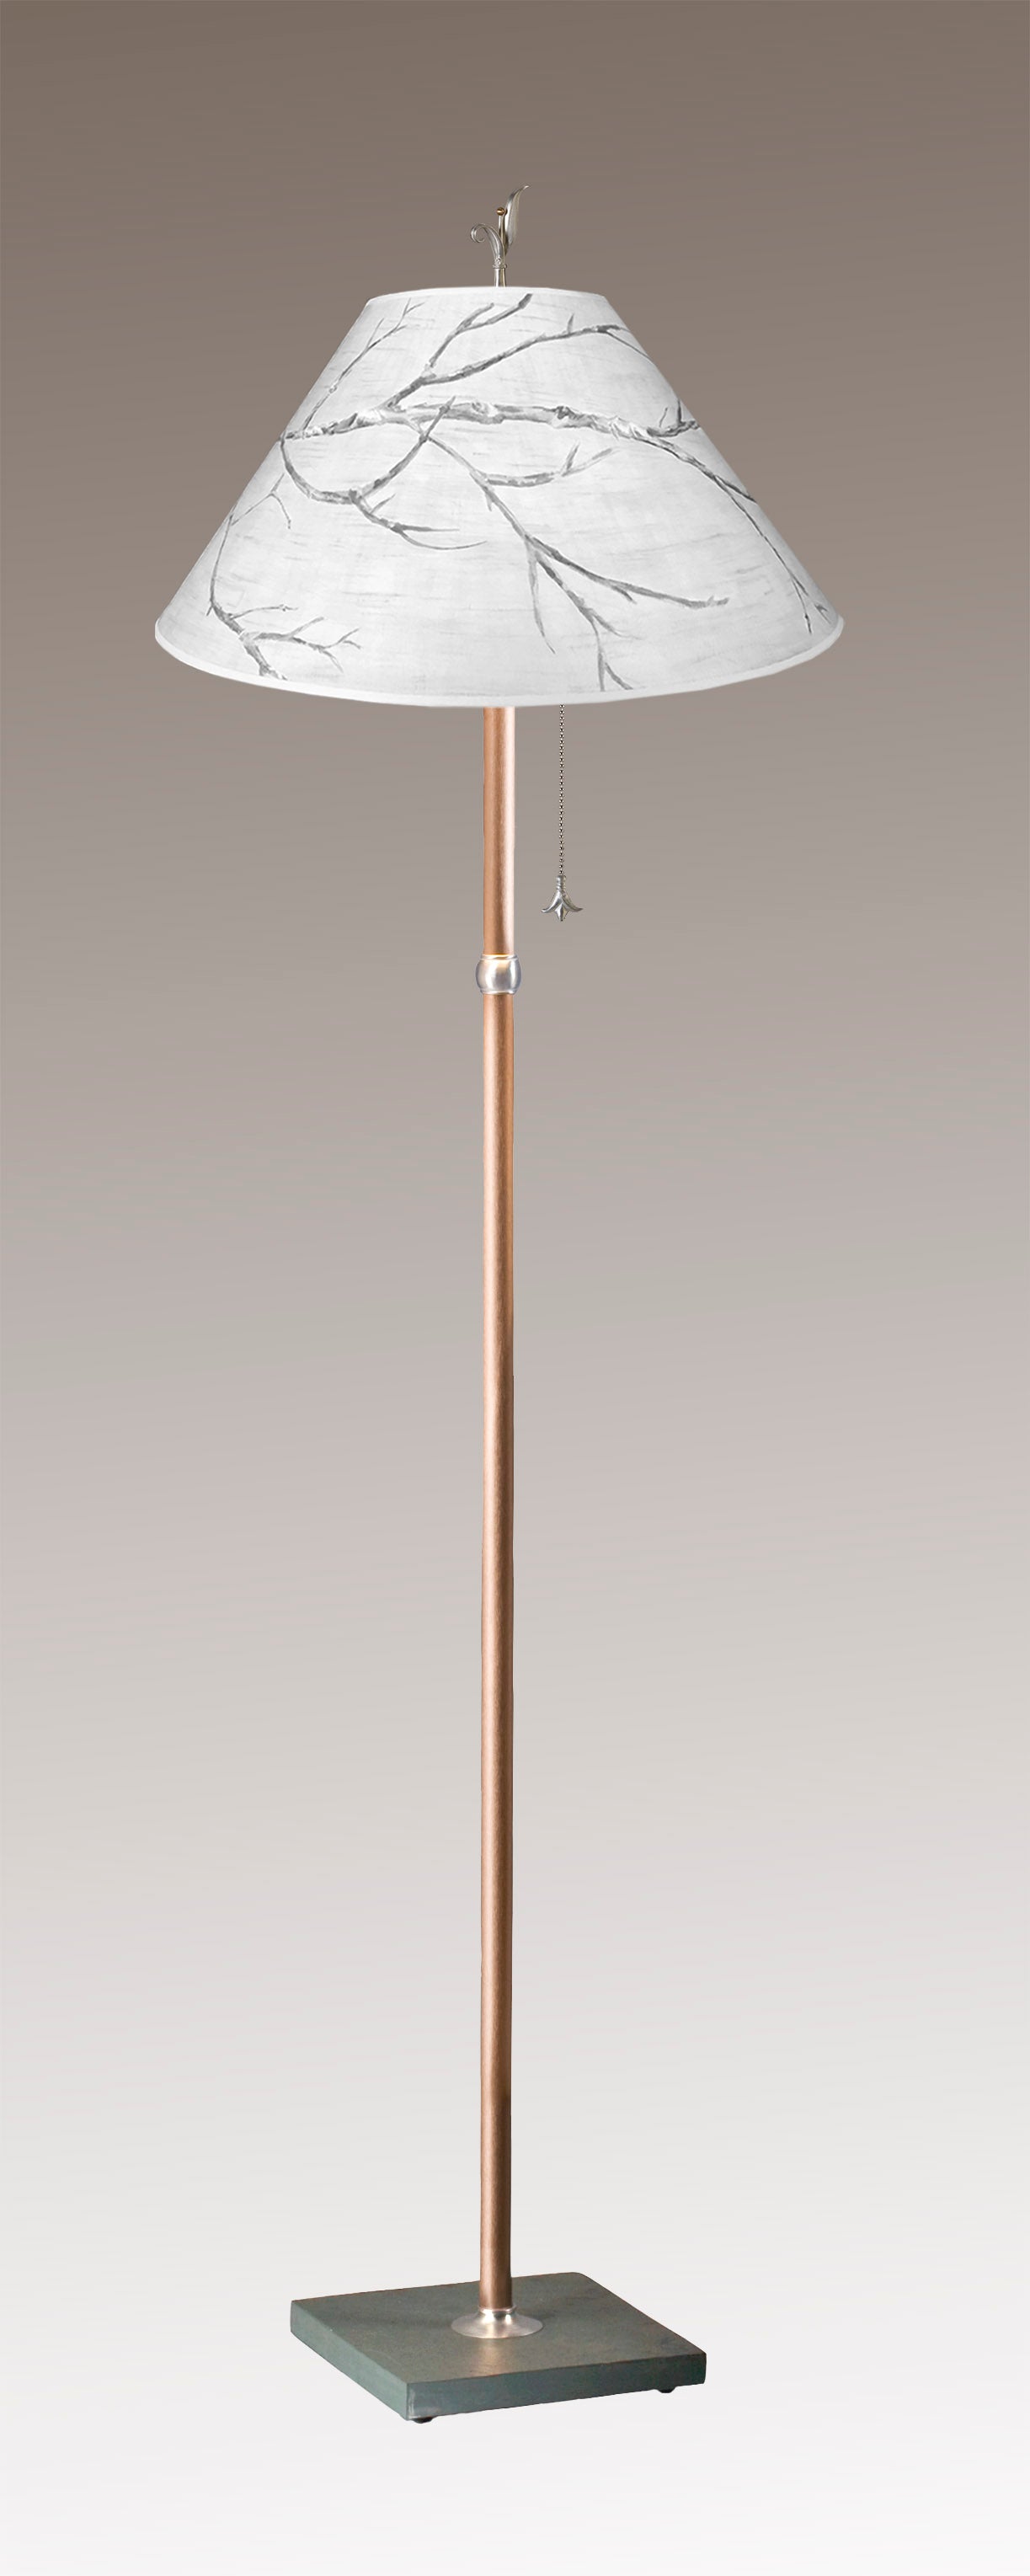 Janna Ugone & Co Floor Lamps Copper Floor Lamp with Large Conical Shade in Sweeping Branch